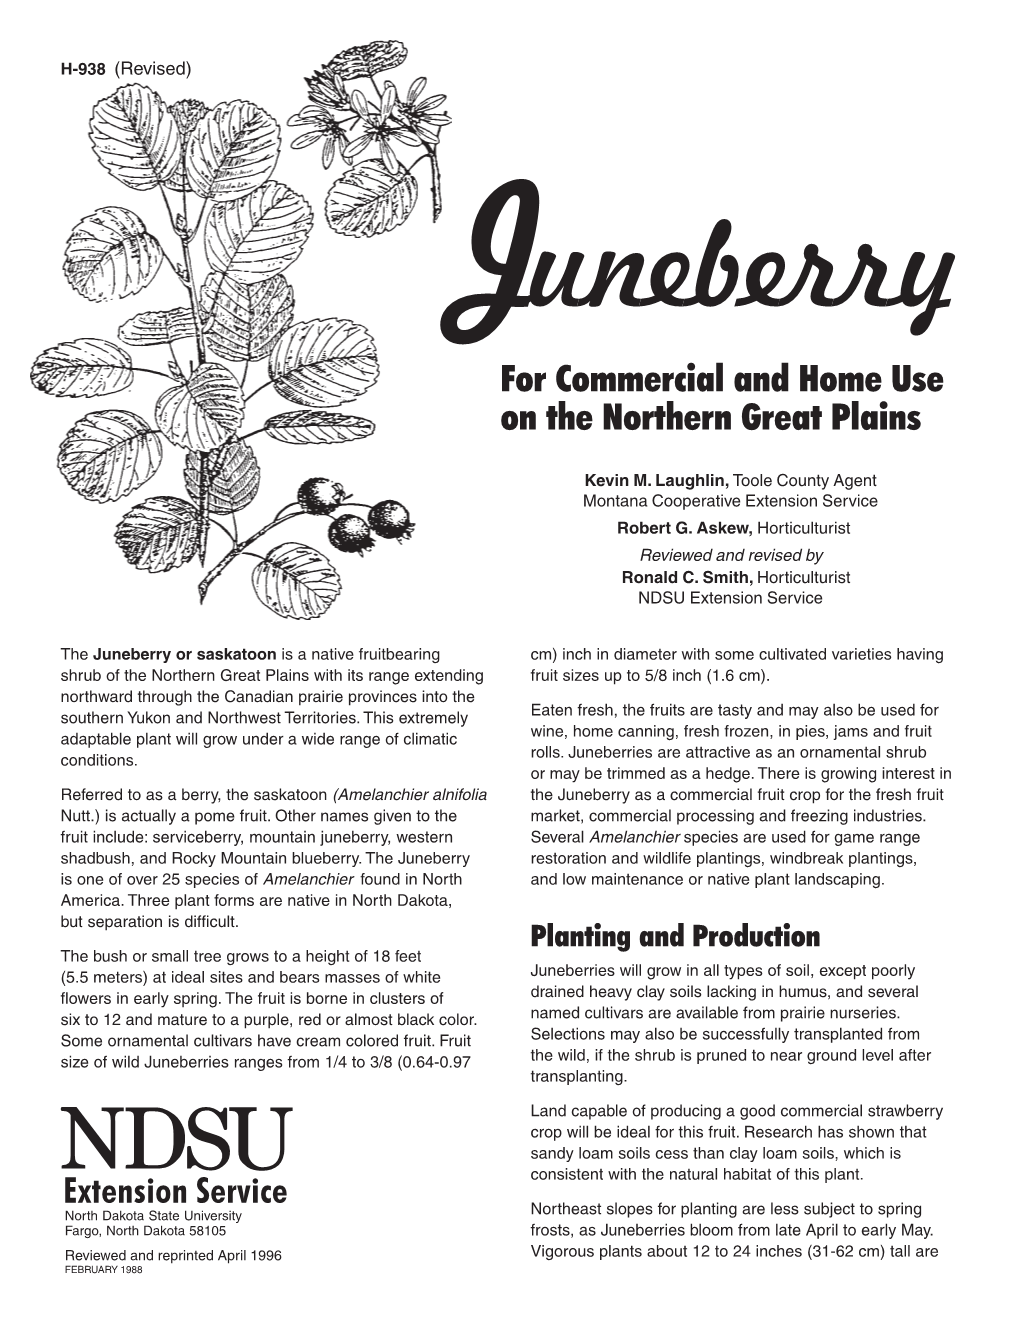 H-938 Juneberry for Commercial and Home Use on the Northern Great